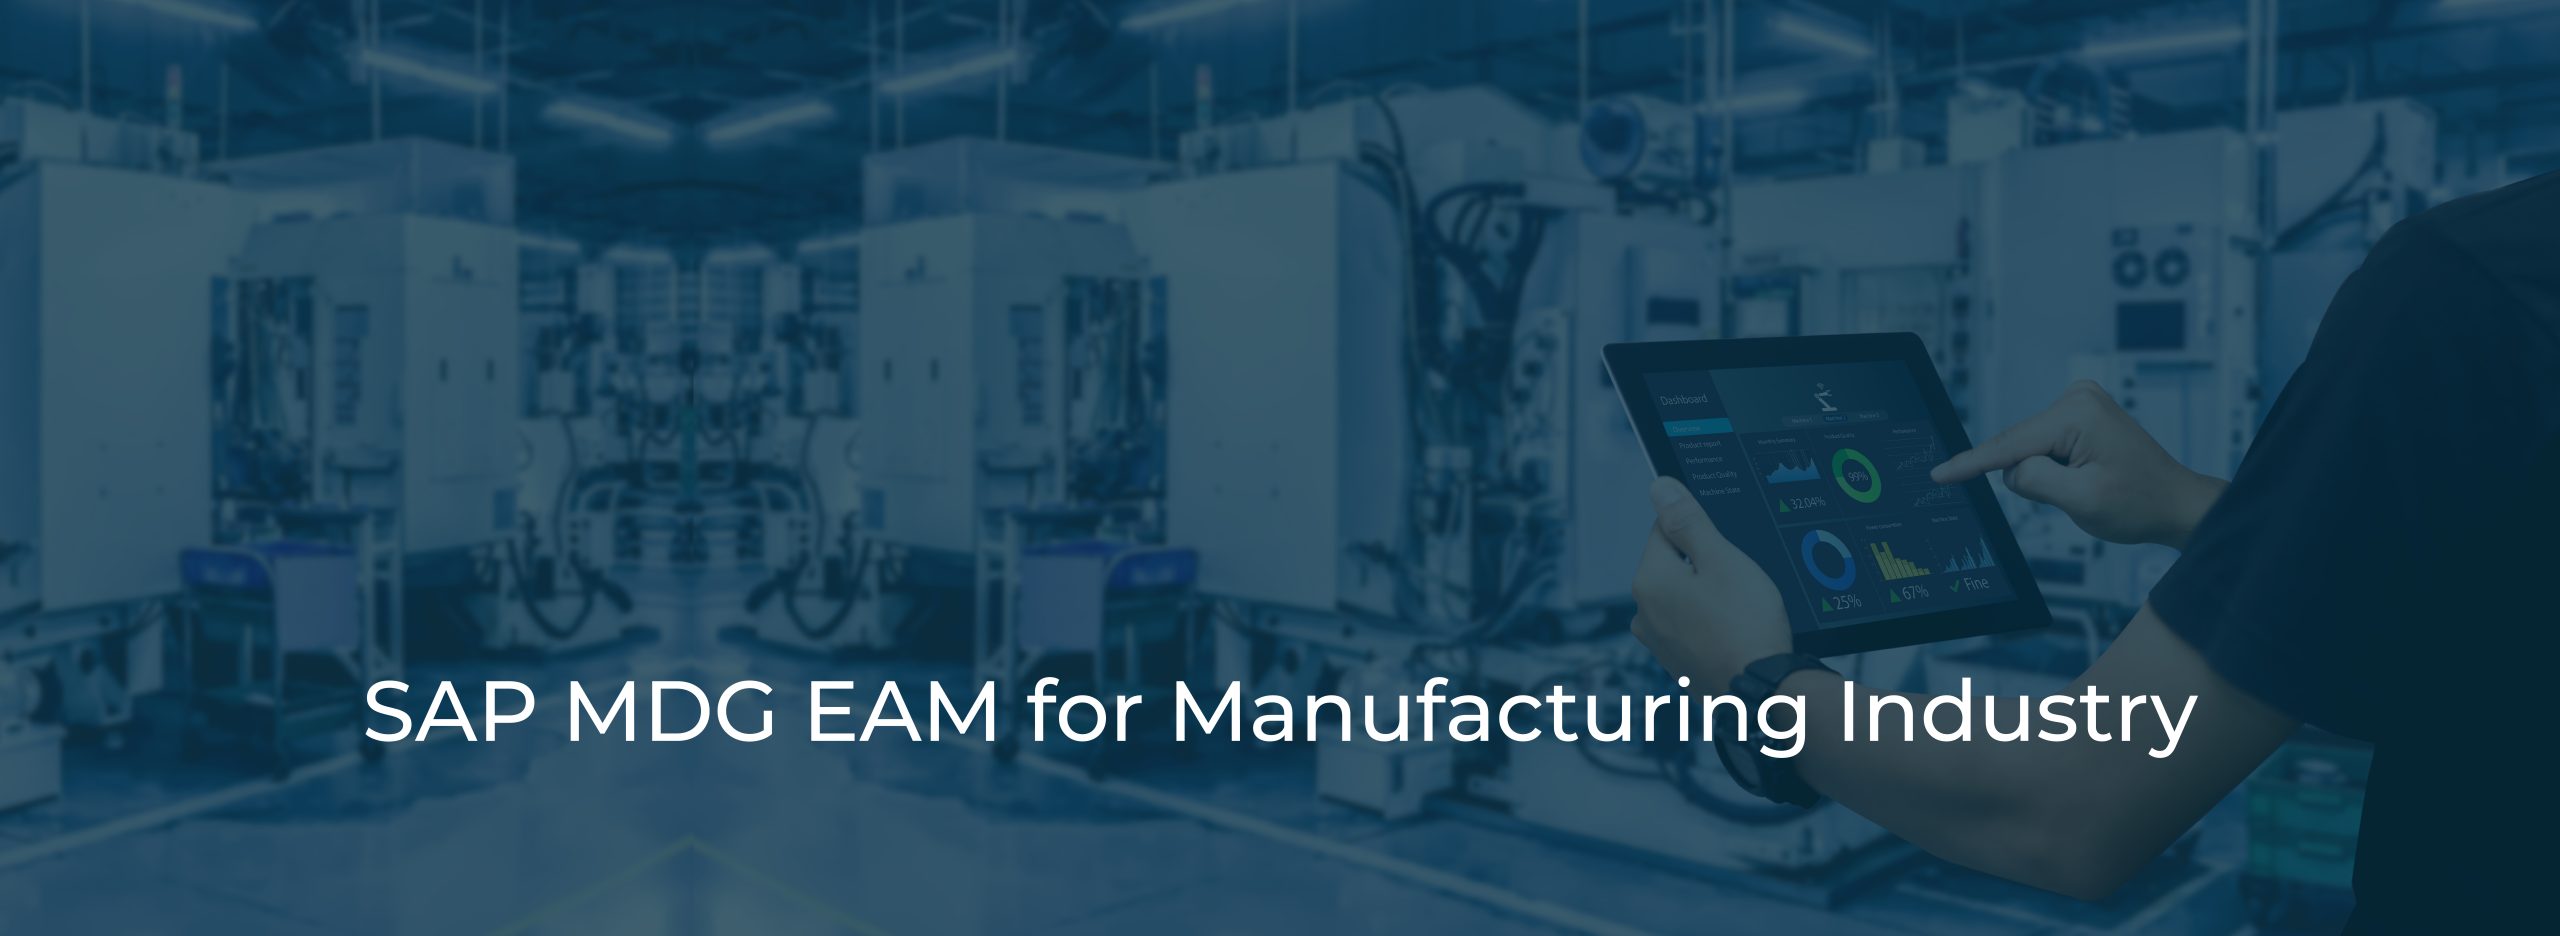 SAP MDG EAM for Manufacturing Industry